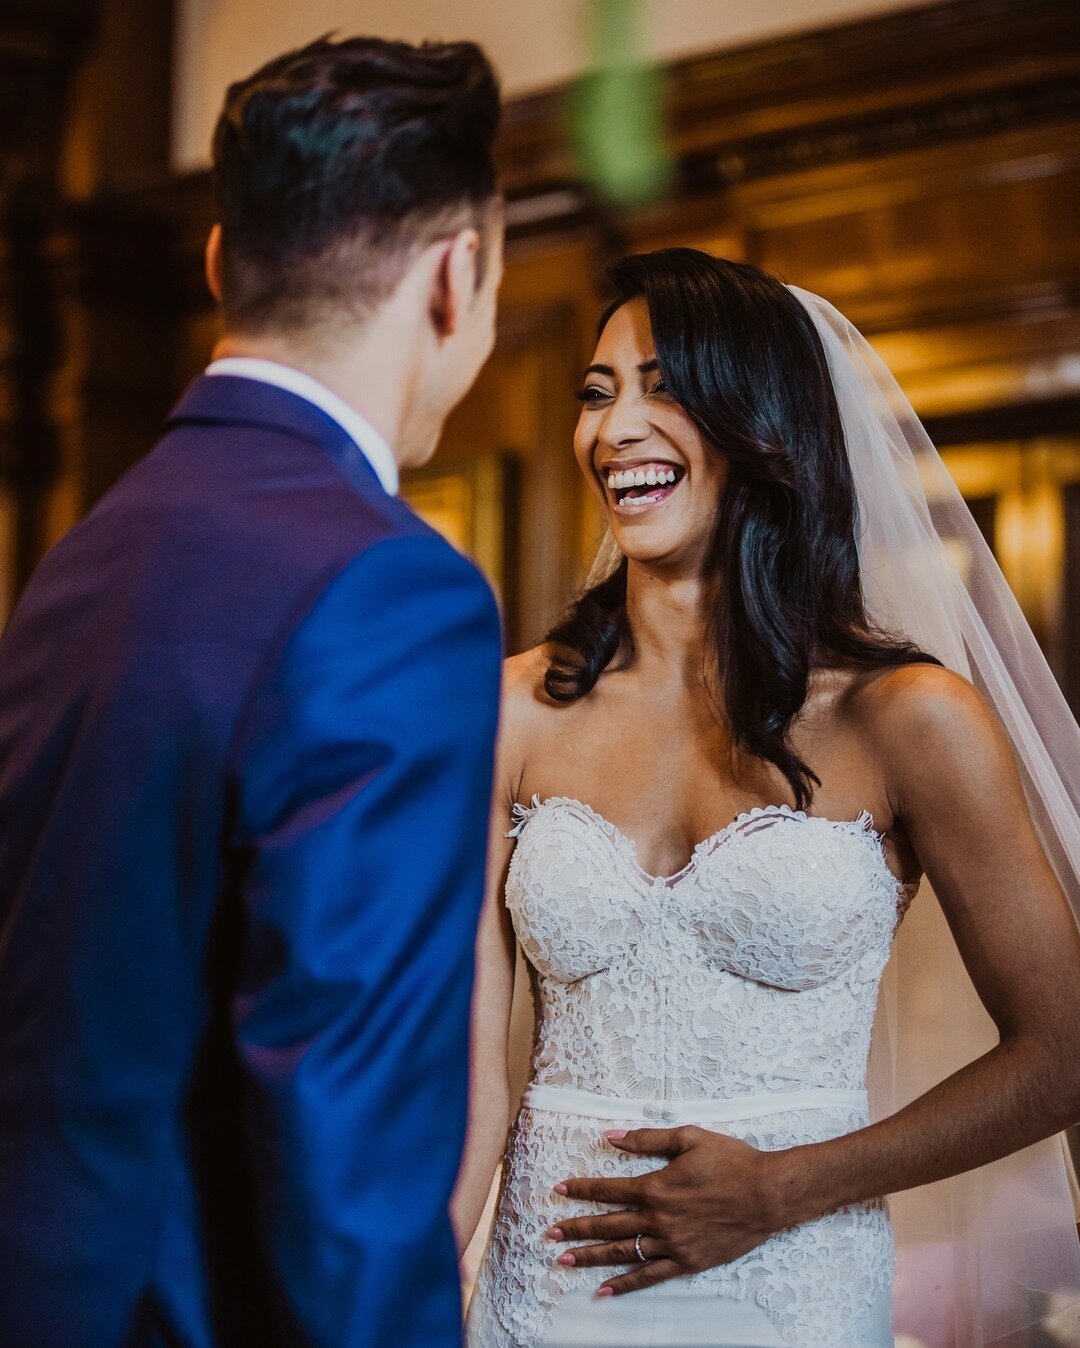 Sometimes, the little f*ck ups and mistakes, especially during a ceremony, create these incredible pockets of comedic relief- and it feels so good laugh and smile with the weight of everything happening, that couples literally shine when it happens. 